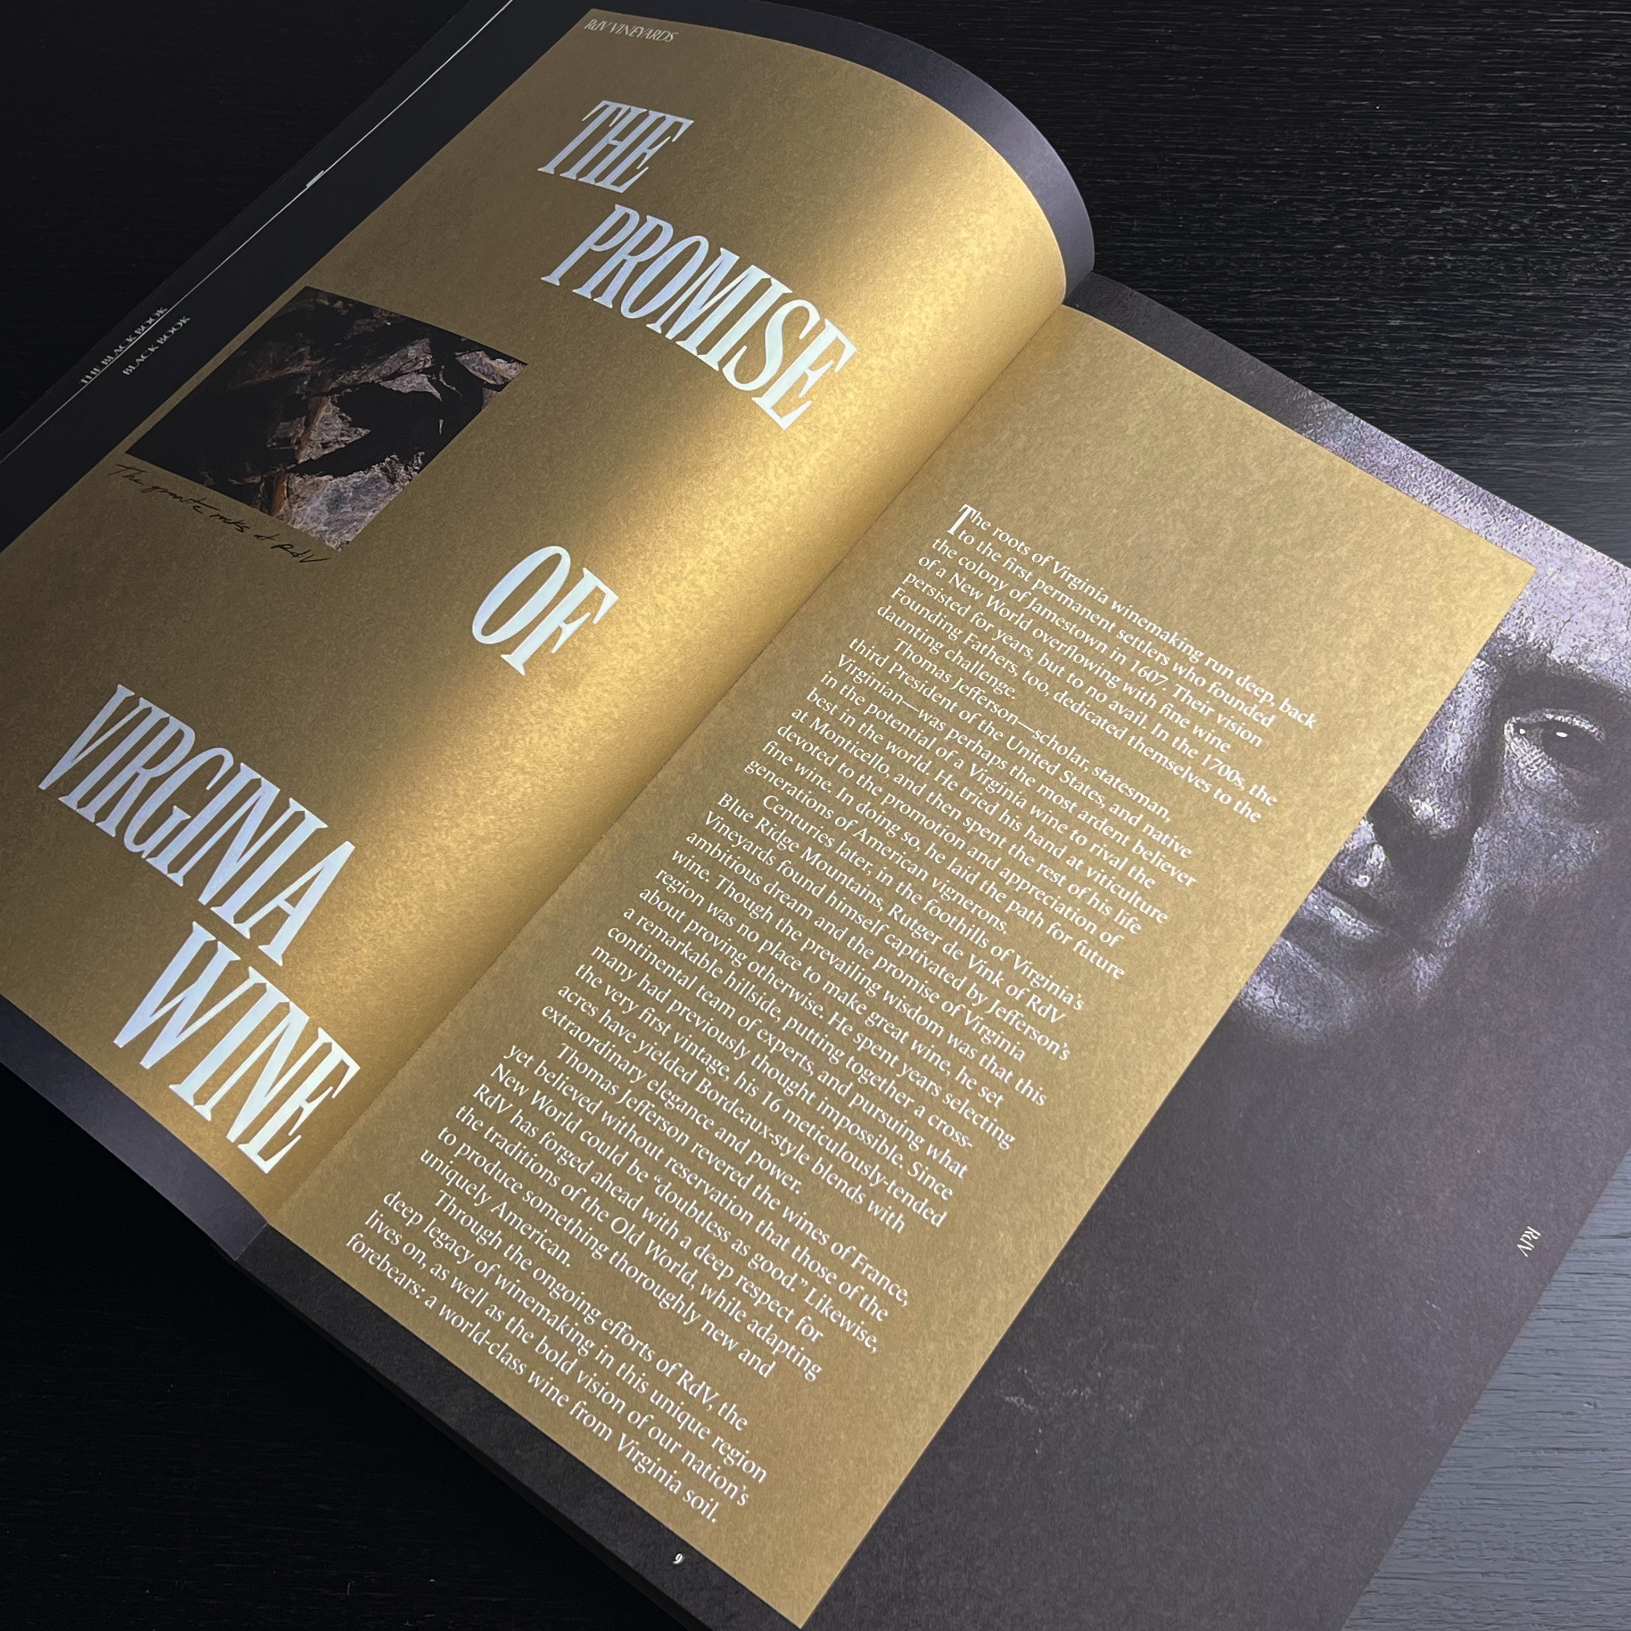 An open magazine featuring an article titled "The Promise of Virginia Wine" with a close-up image of a contemplative face in the shadows on the right page, showcased alongside an exclusive excerpt from "Black